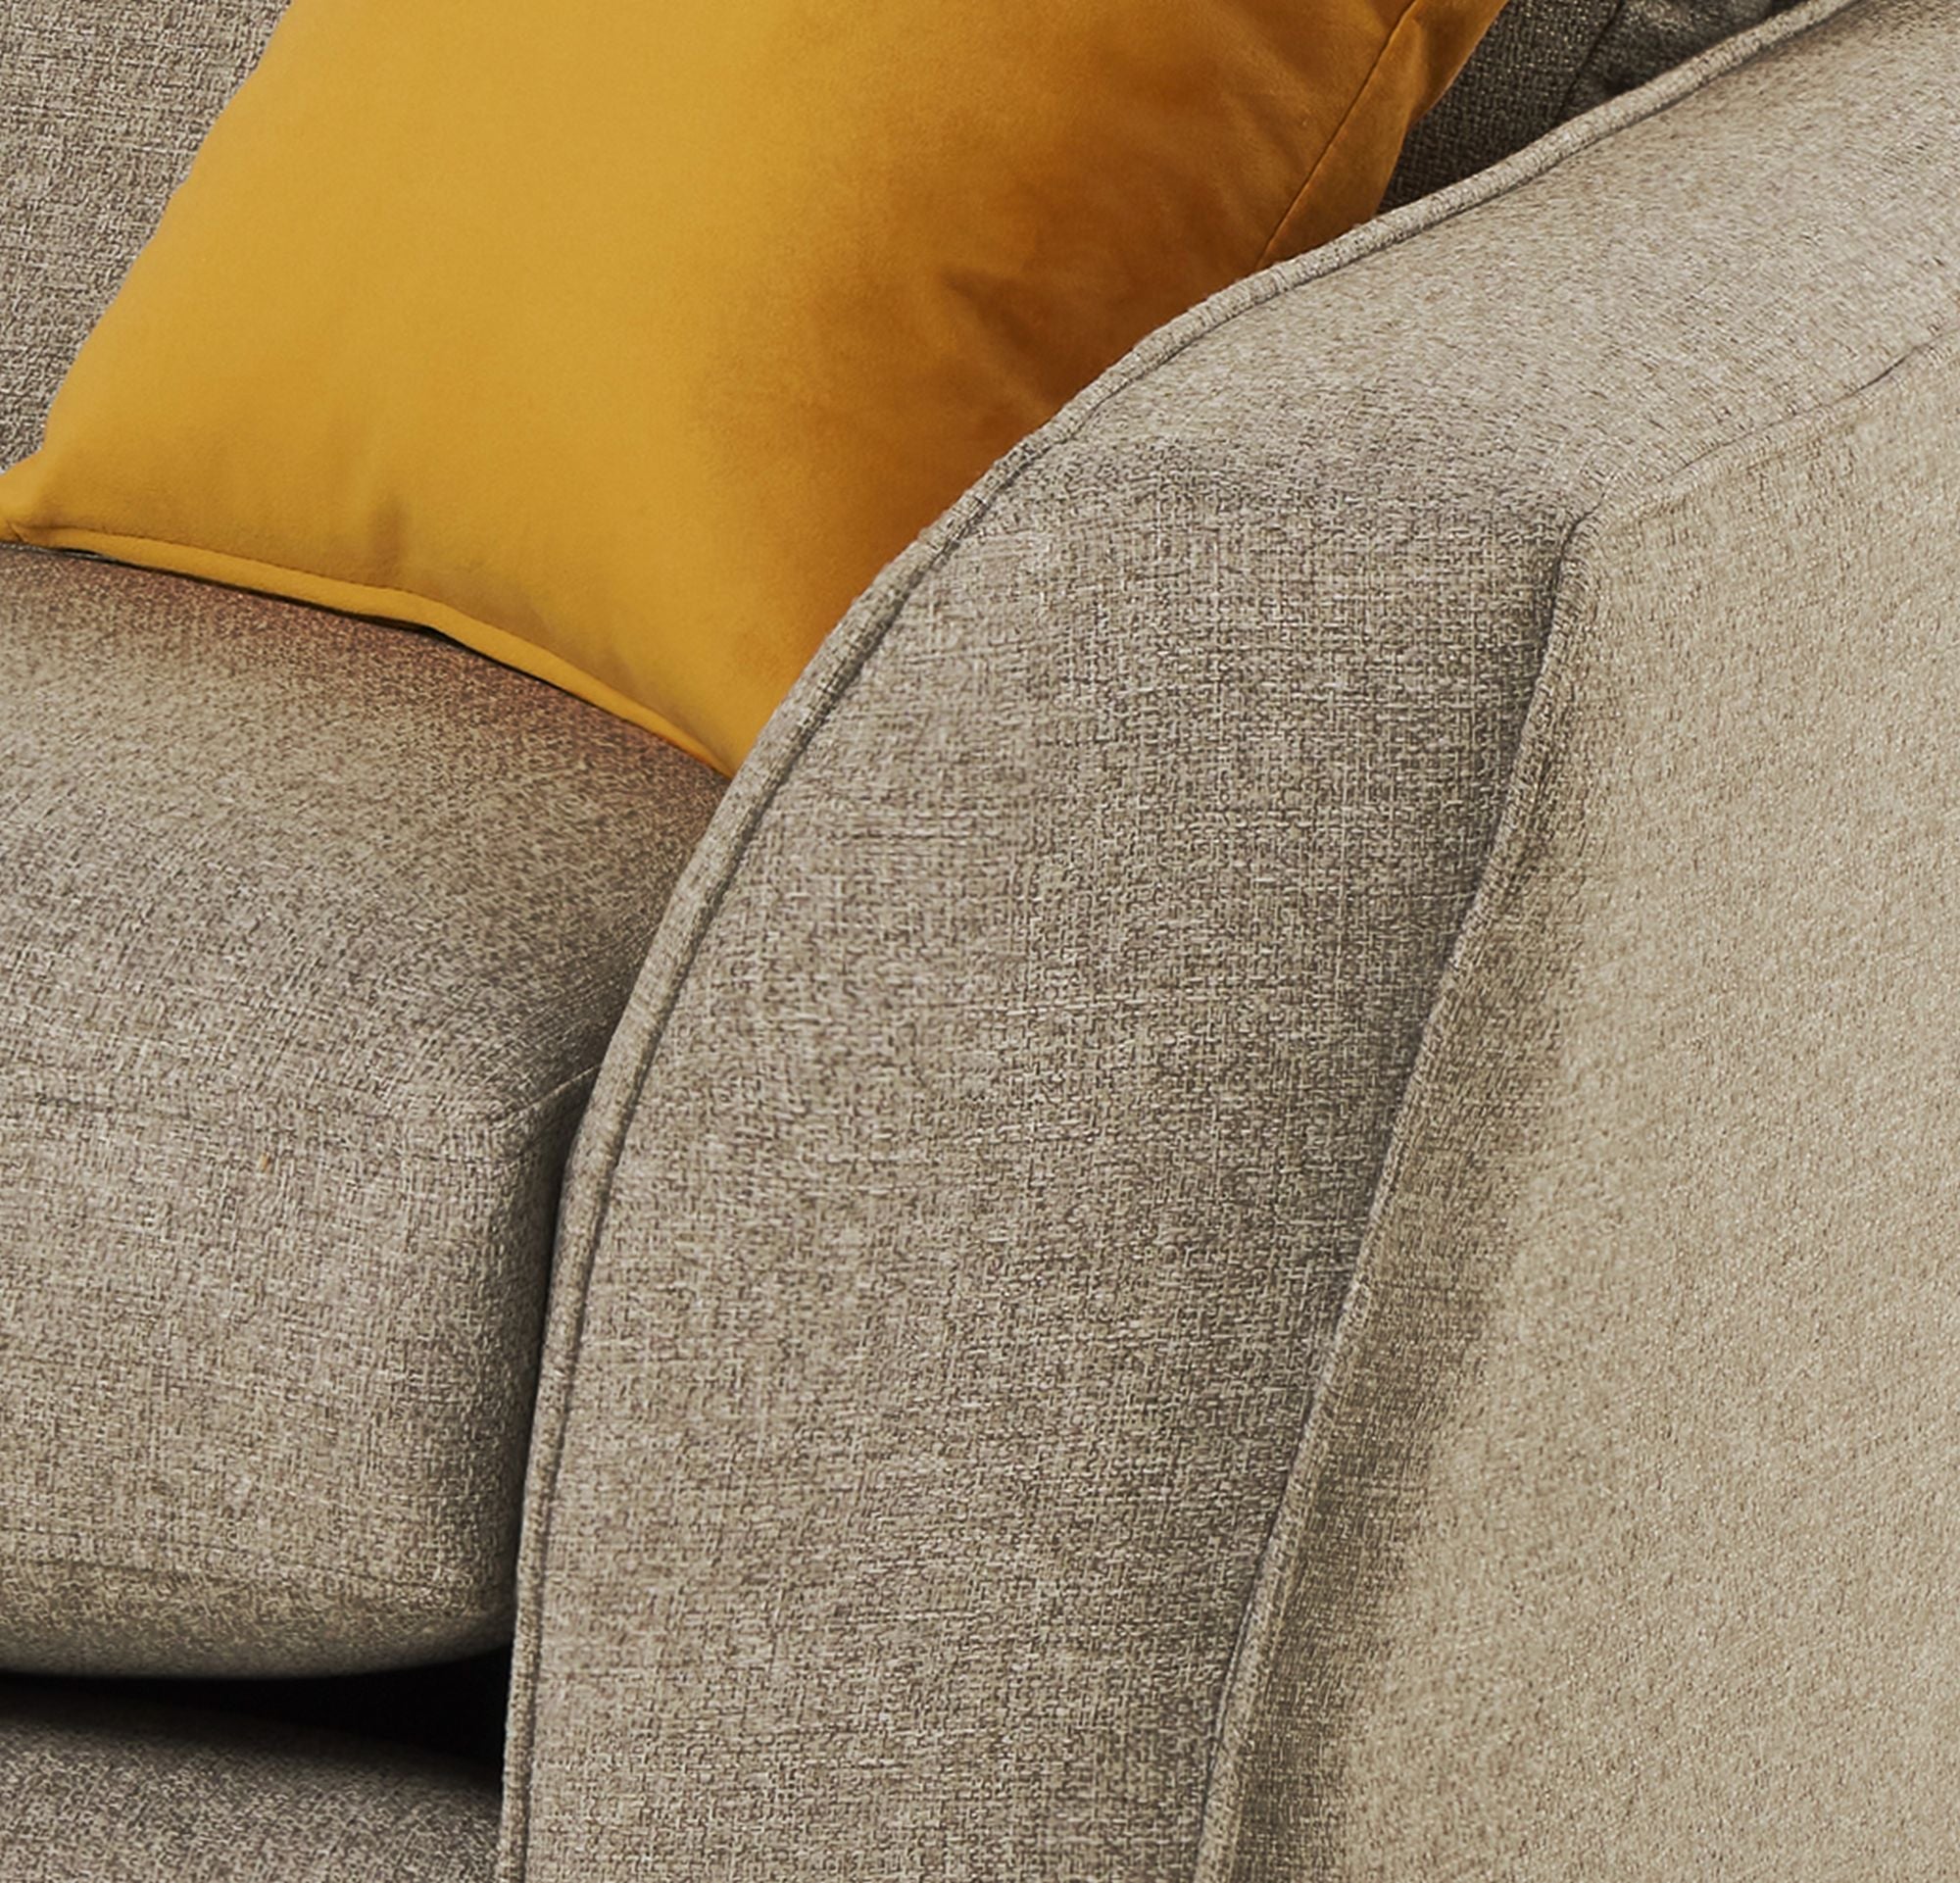 Libby sofa arm in close up showing dual piping detail